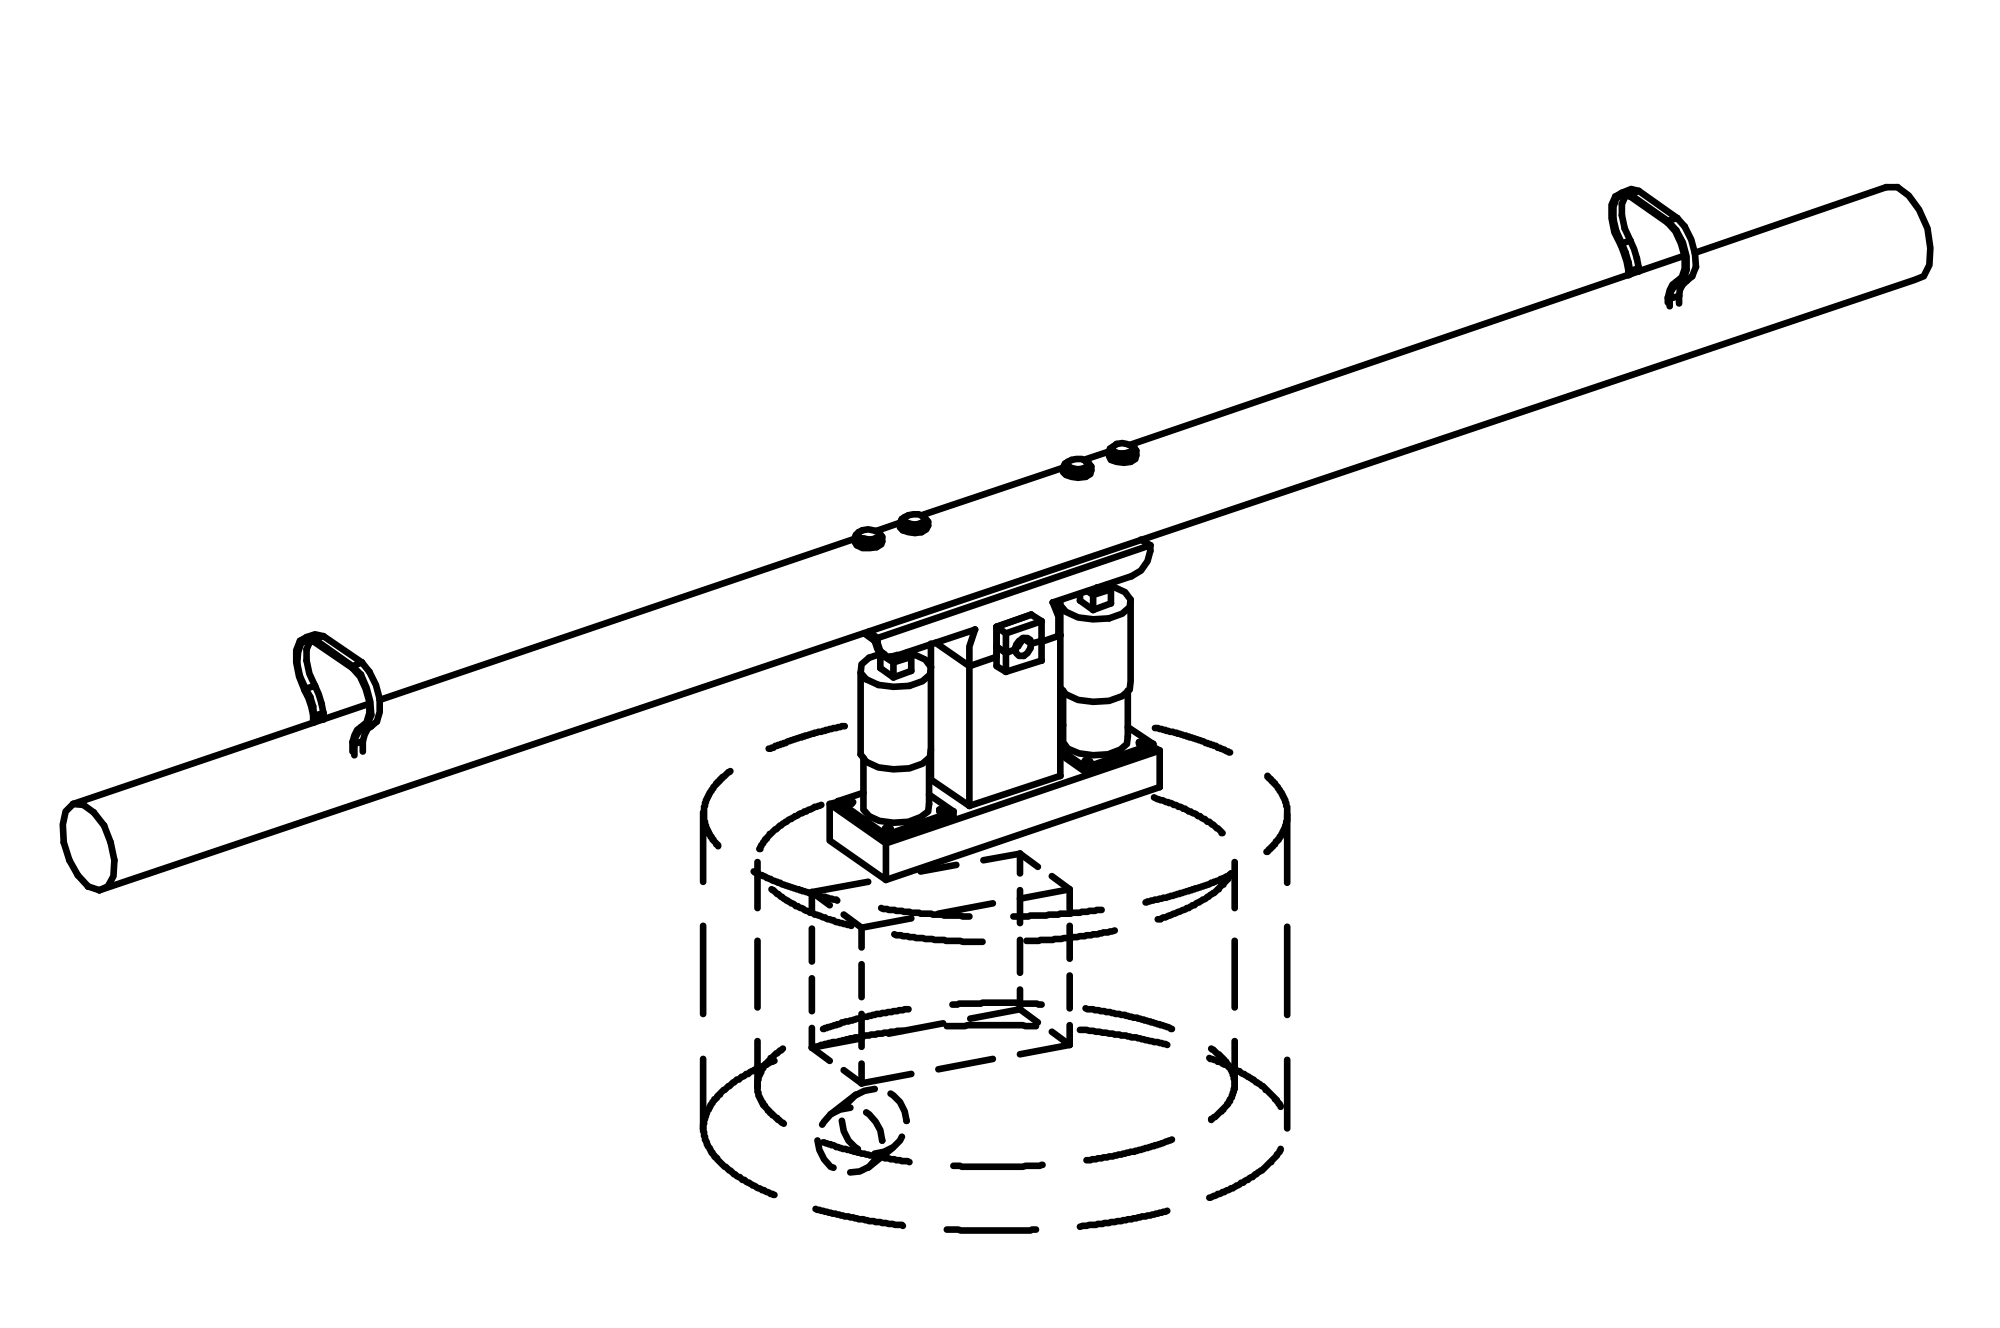 Pump See-saw with water reservoir and one way distribution